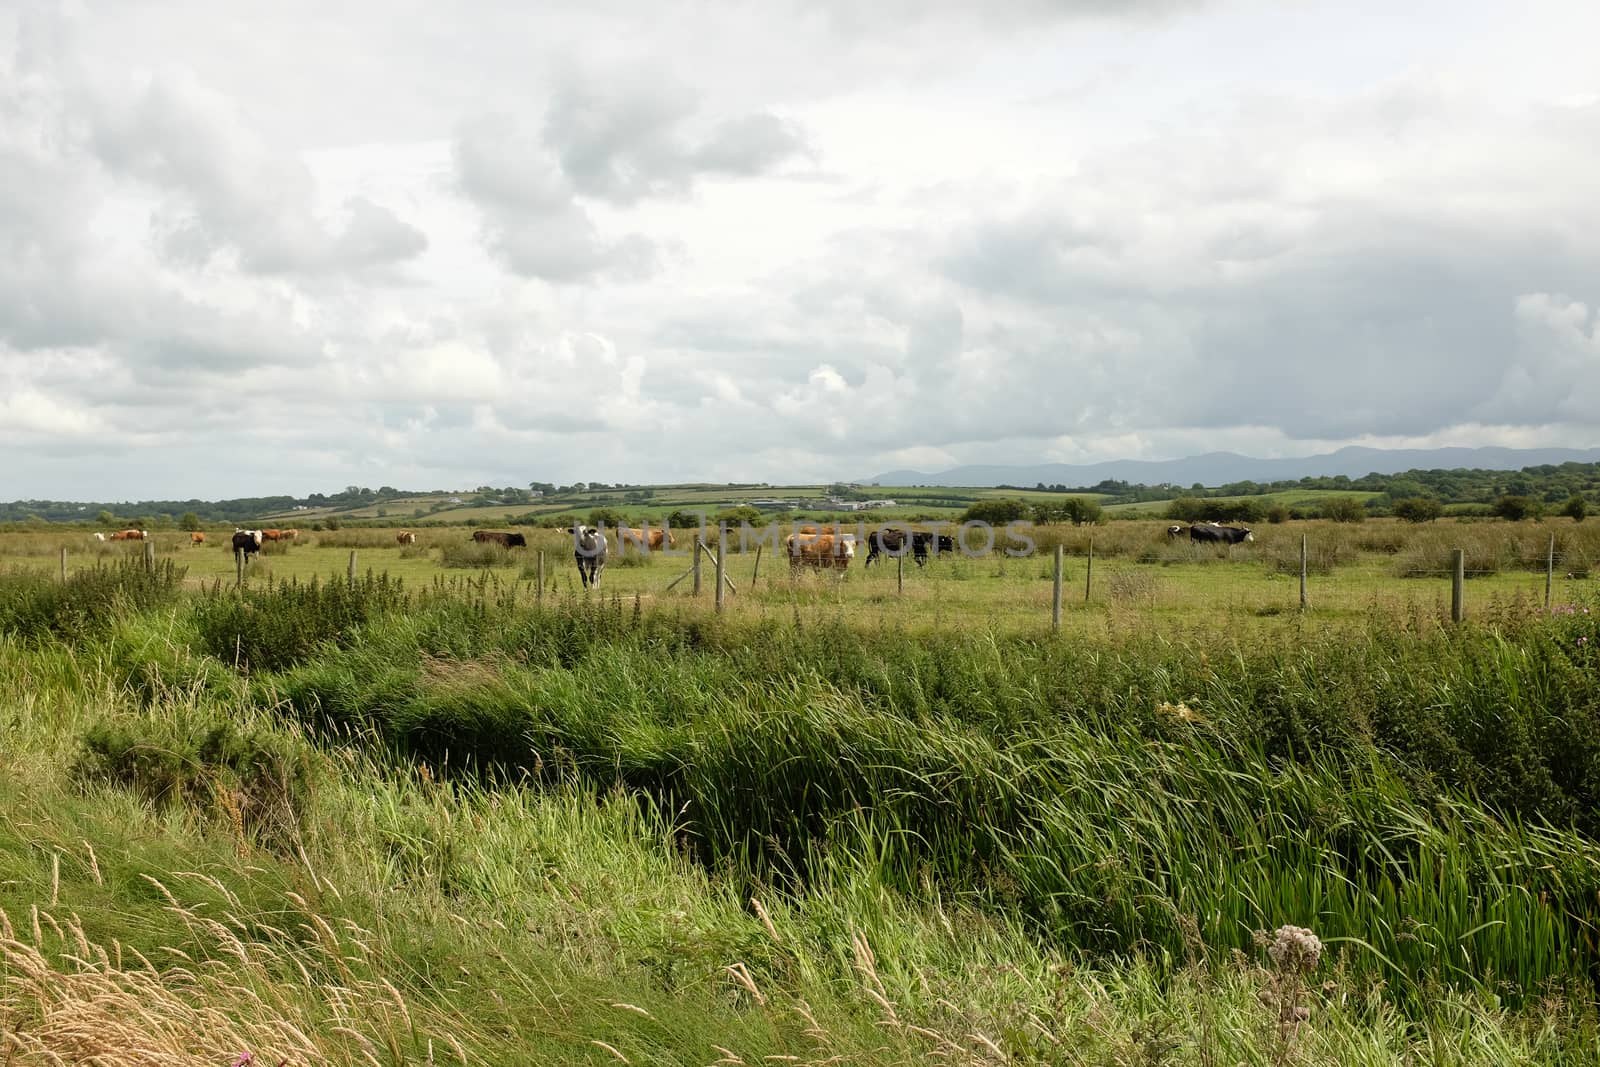 Reeds lead to a field with a herd of cattle backed by a cloudy sky.